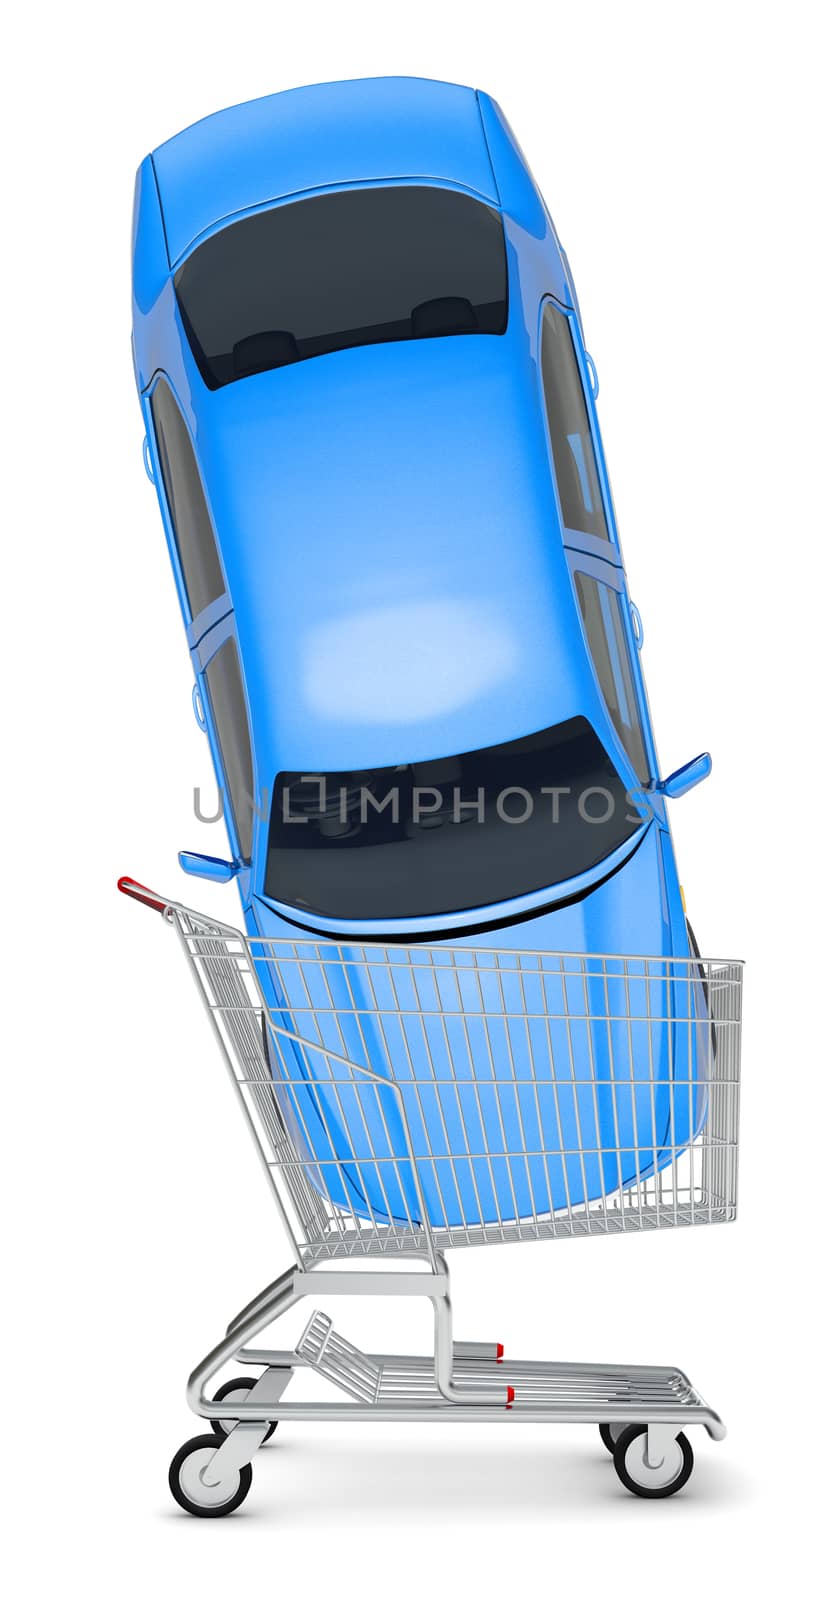 Blue car in shopping cart on isolated white background